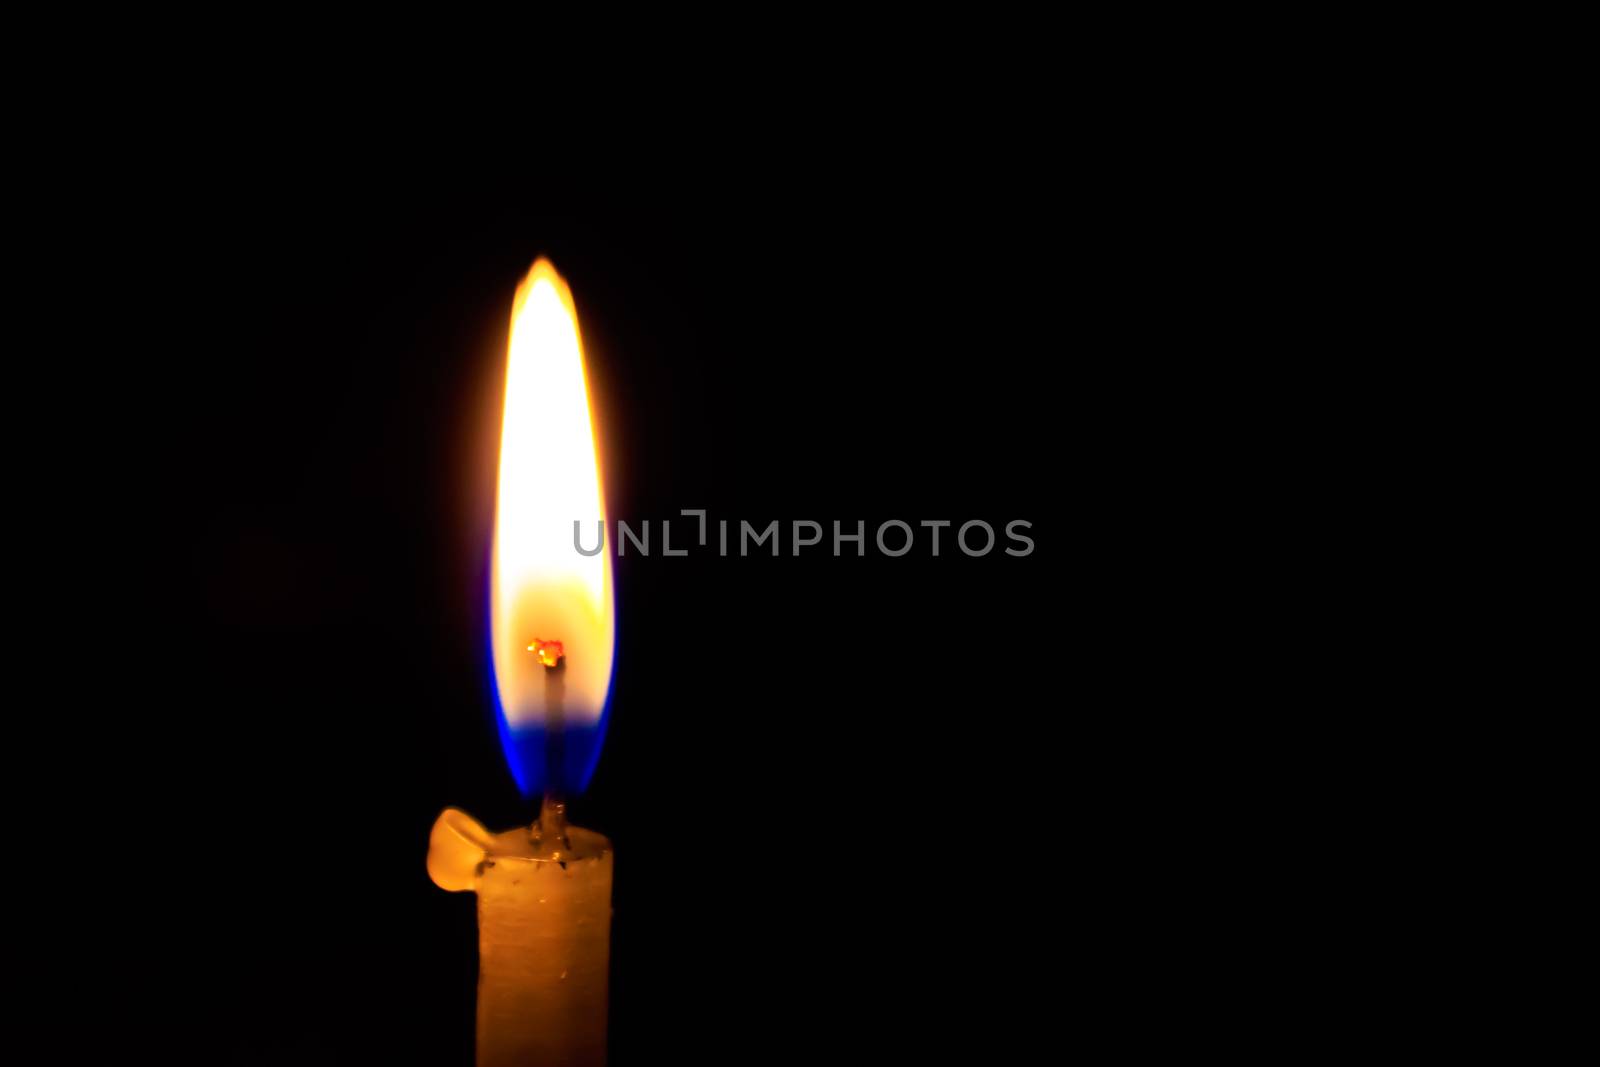 A burn or burning candle on black background, close up. Image taken in Diwali, a traditional celebration of Indian festival.